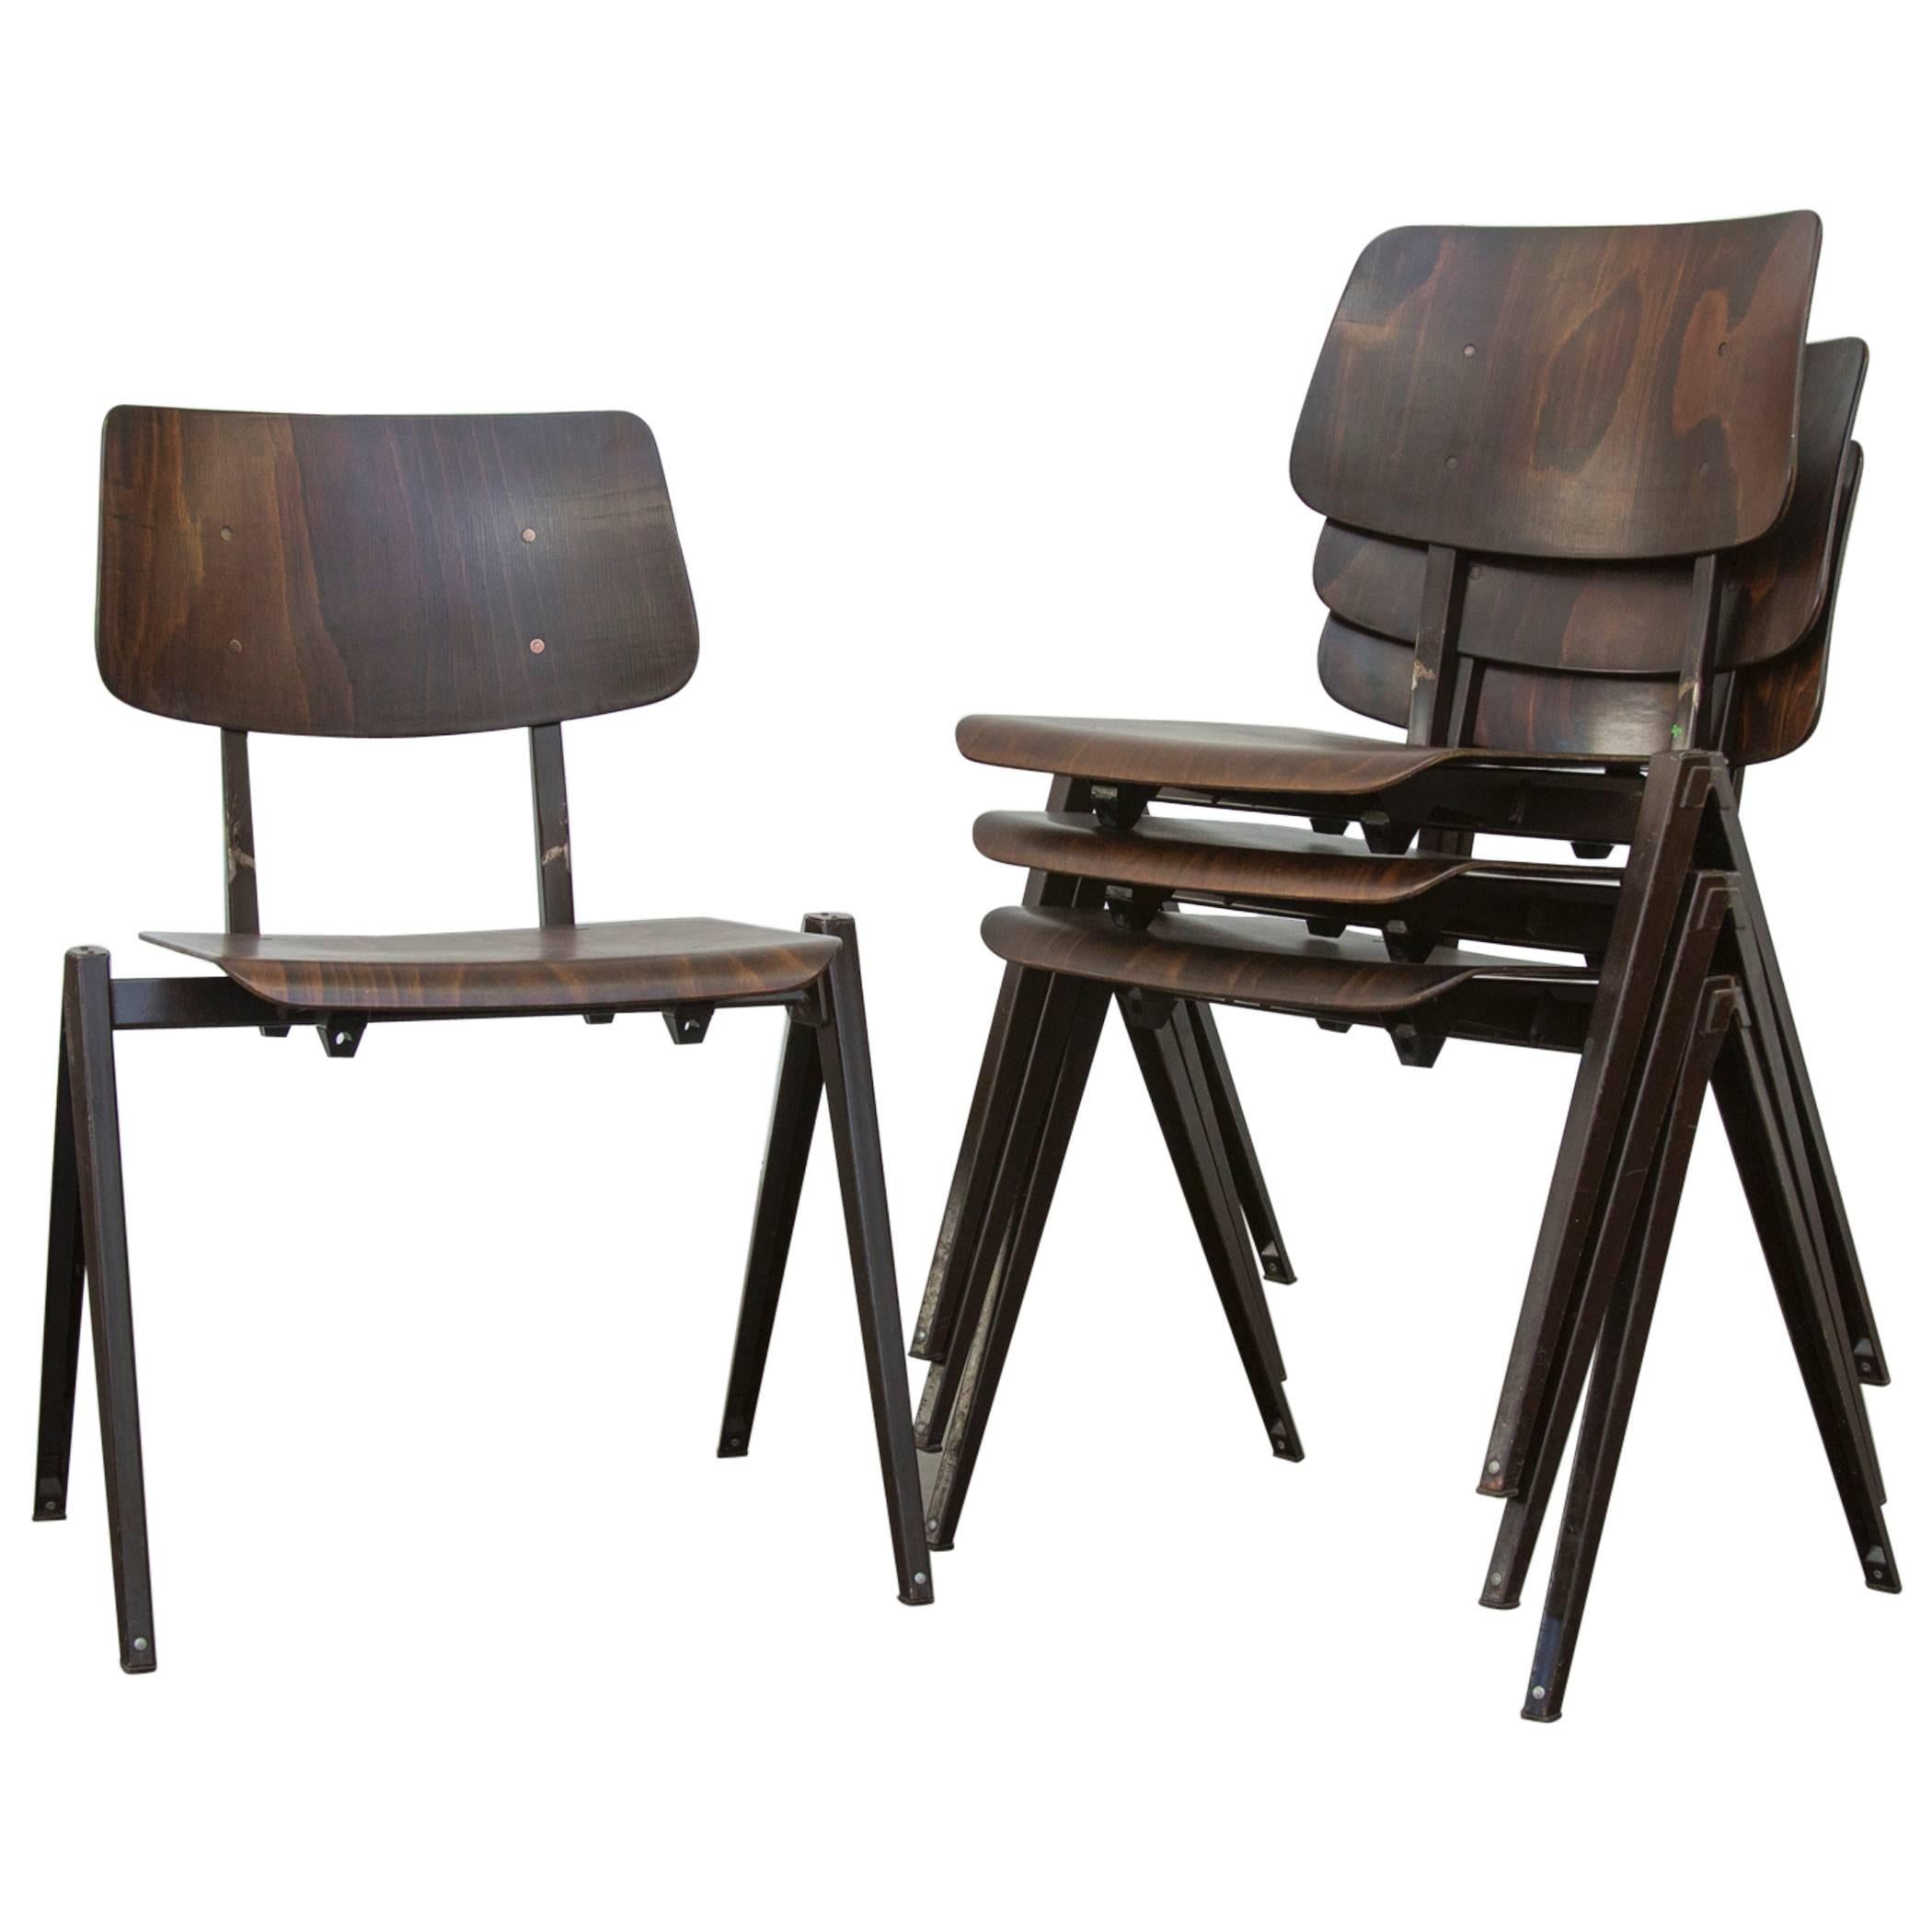 Set of Four Prouve Style Stacking Industrial School Chairs